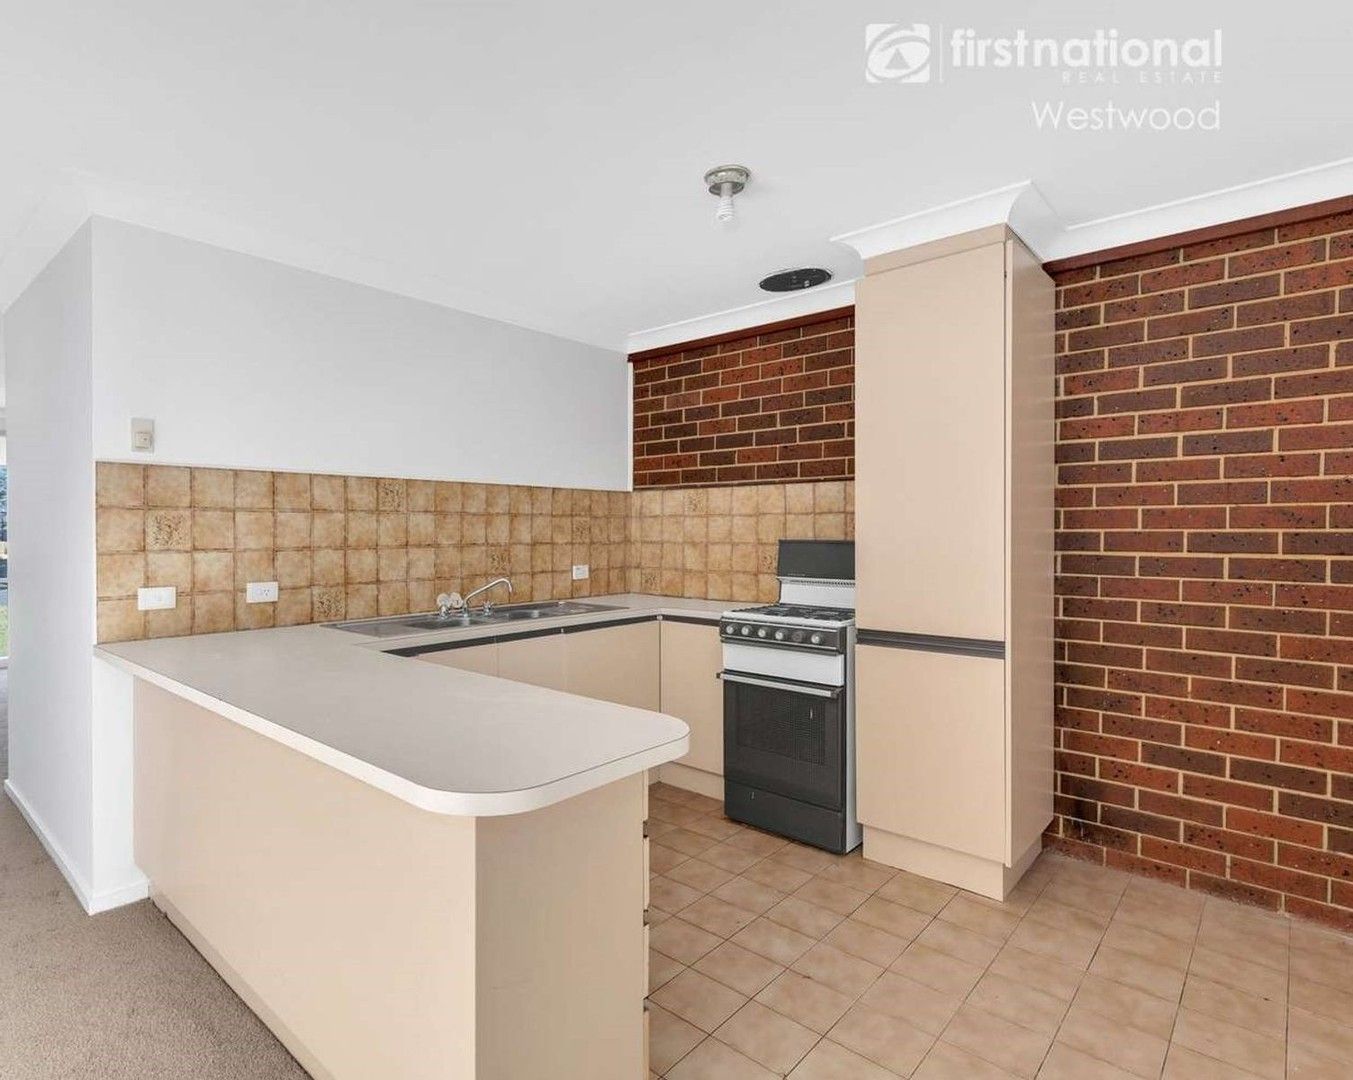 2 bedrooms Apartment / Unit / Flat in 2/146 Mossfiel Drive HOPPERS CROSSING VIC, 3029